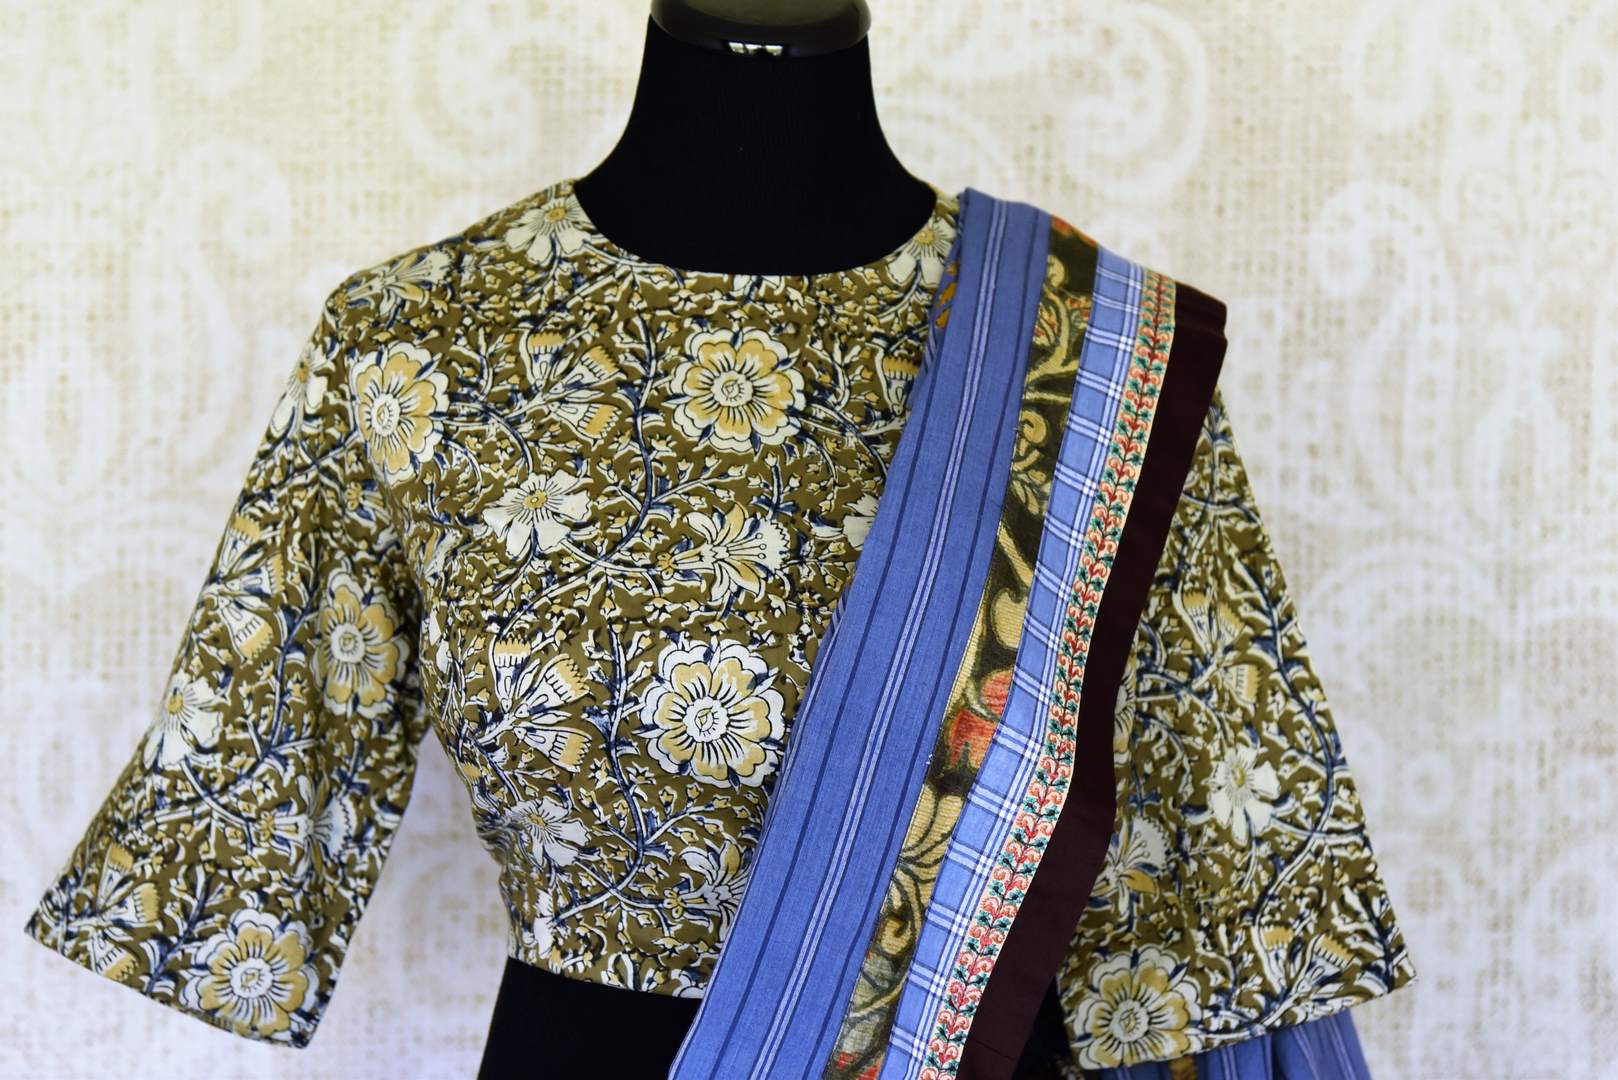 Buy blue linen sari with saree blouse online in USA and Kalamkari applique. Add tasteful Indian woven saris to your ethnic wardrobe from Pure Elegance Indian fashion store in USA. We have an exclusive range of Indian designer sarees, wedding saris, handloom sarees to make your Indian look absolutely captivating.-blouse pallu